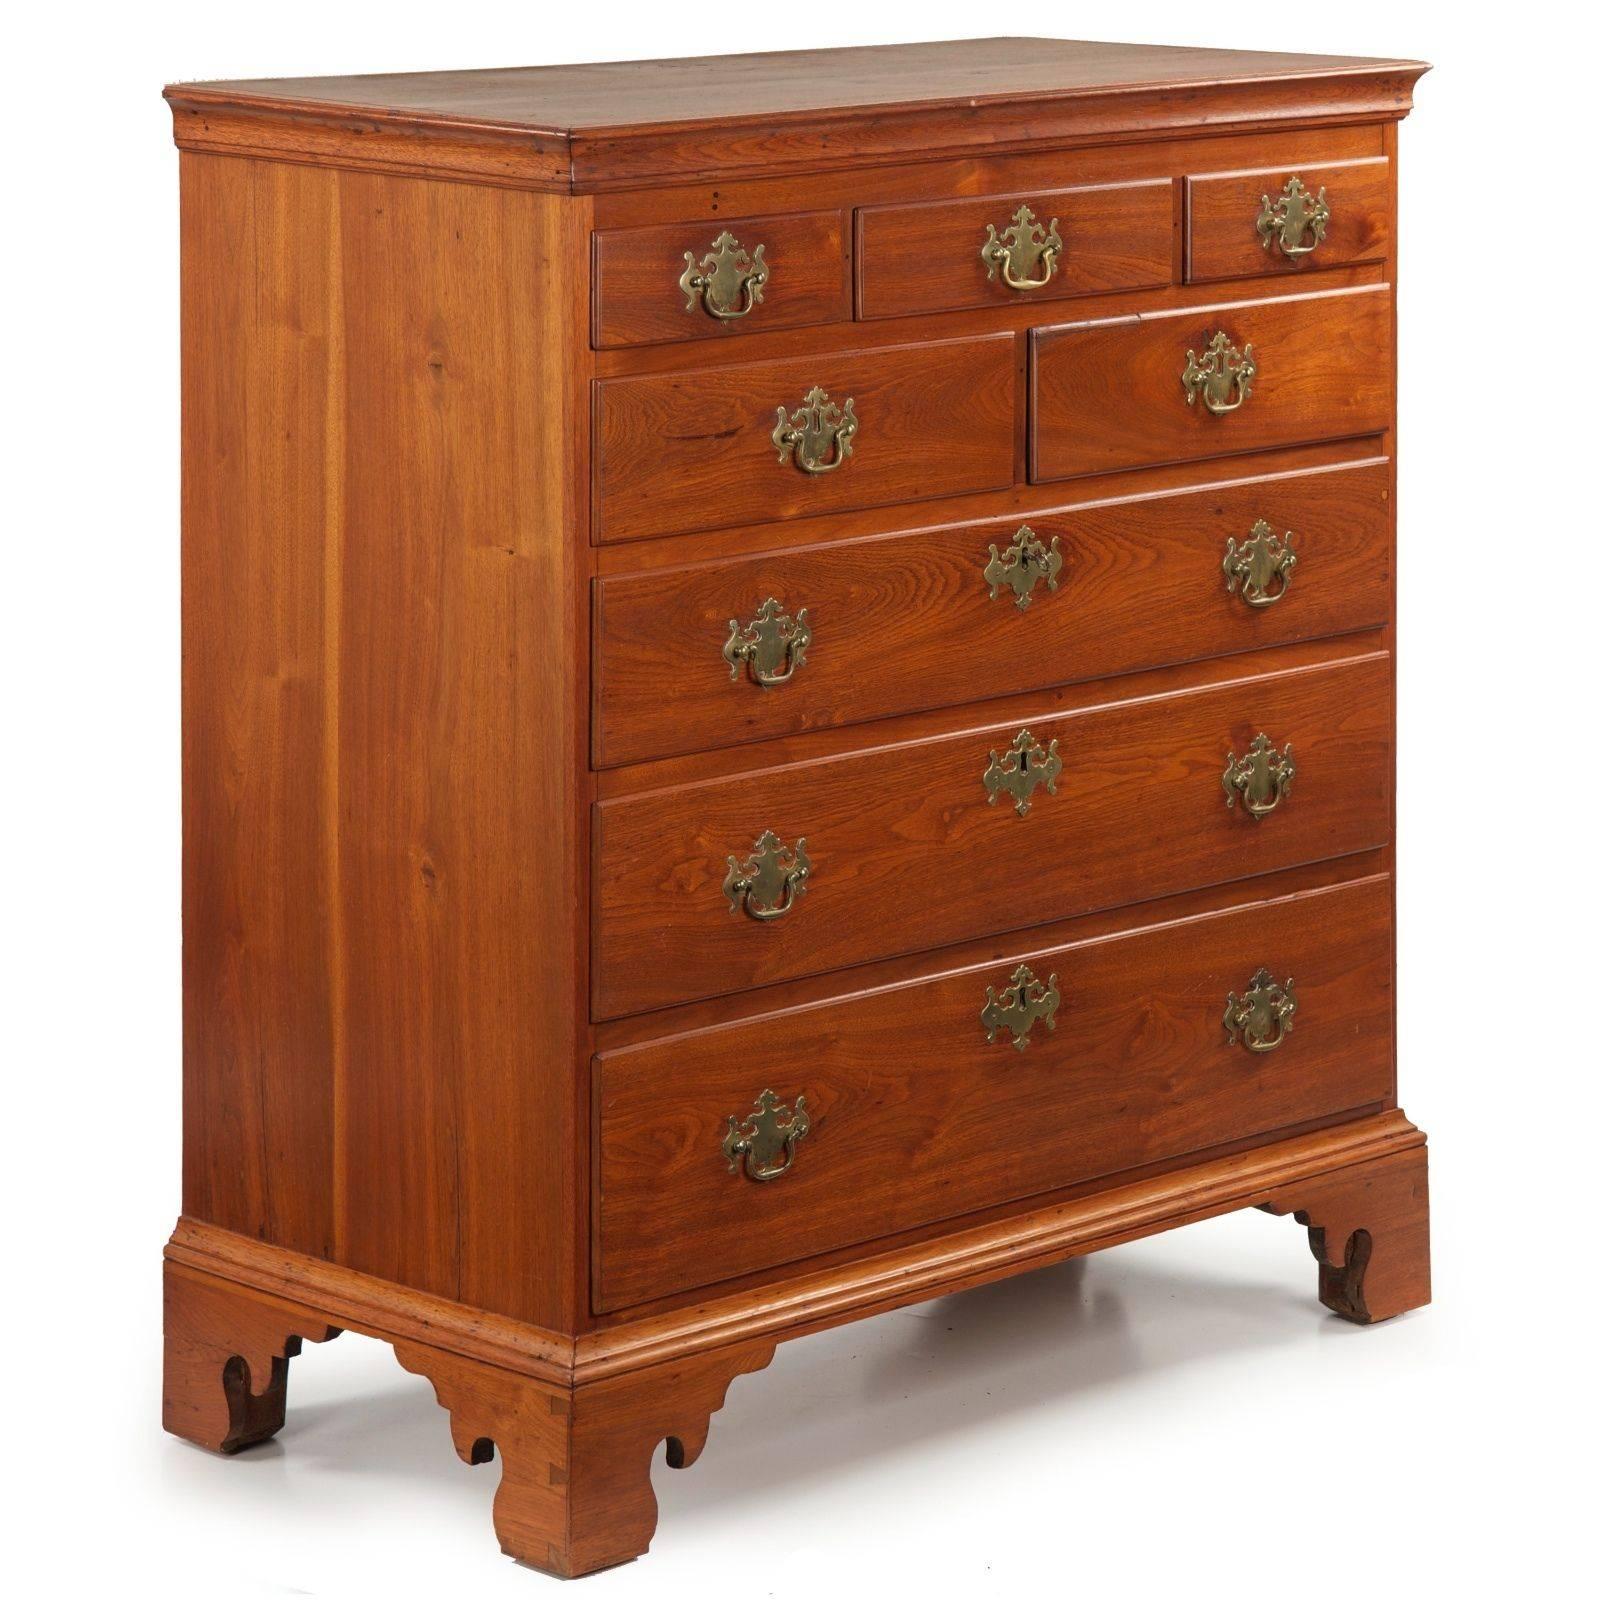 A very attractive piece executed in solid walnut, this delightful chest of drawers was crafted during the last years of the 18th Century in Pennsylvania.  The bold crown molding surrounding the finished walnut top projects over a tidy facade of